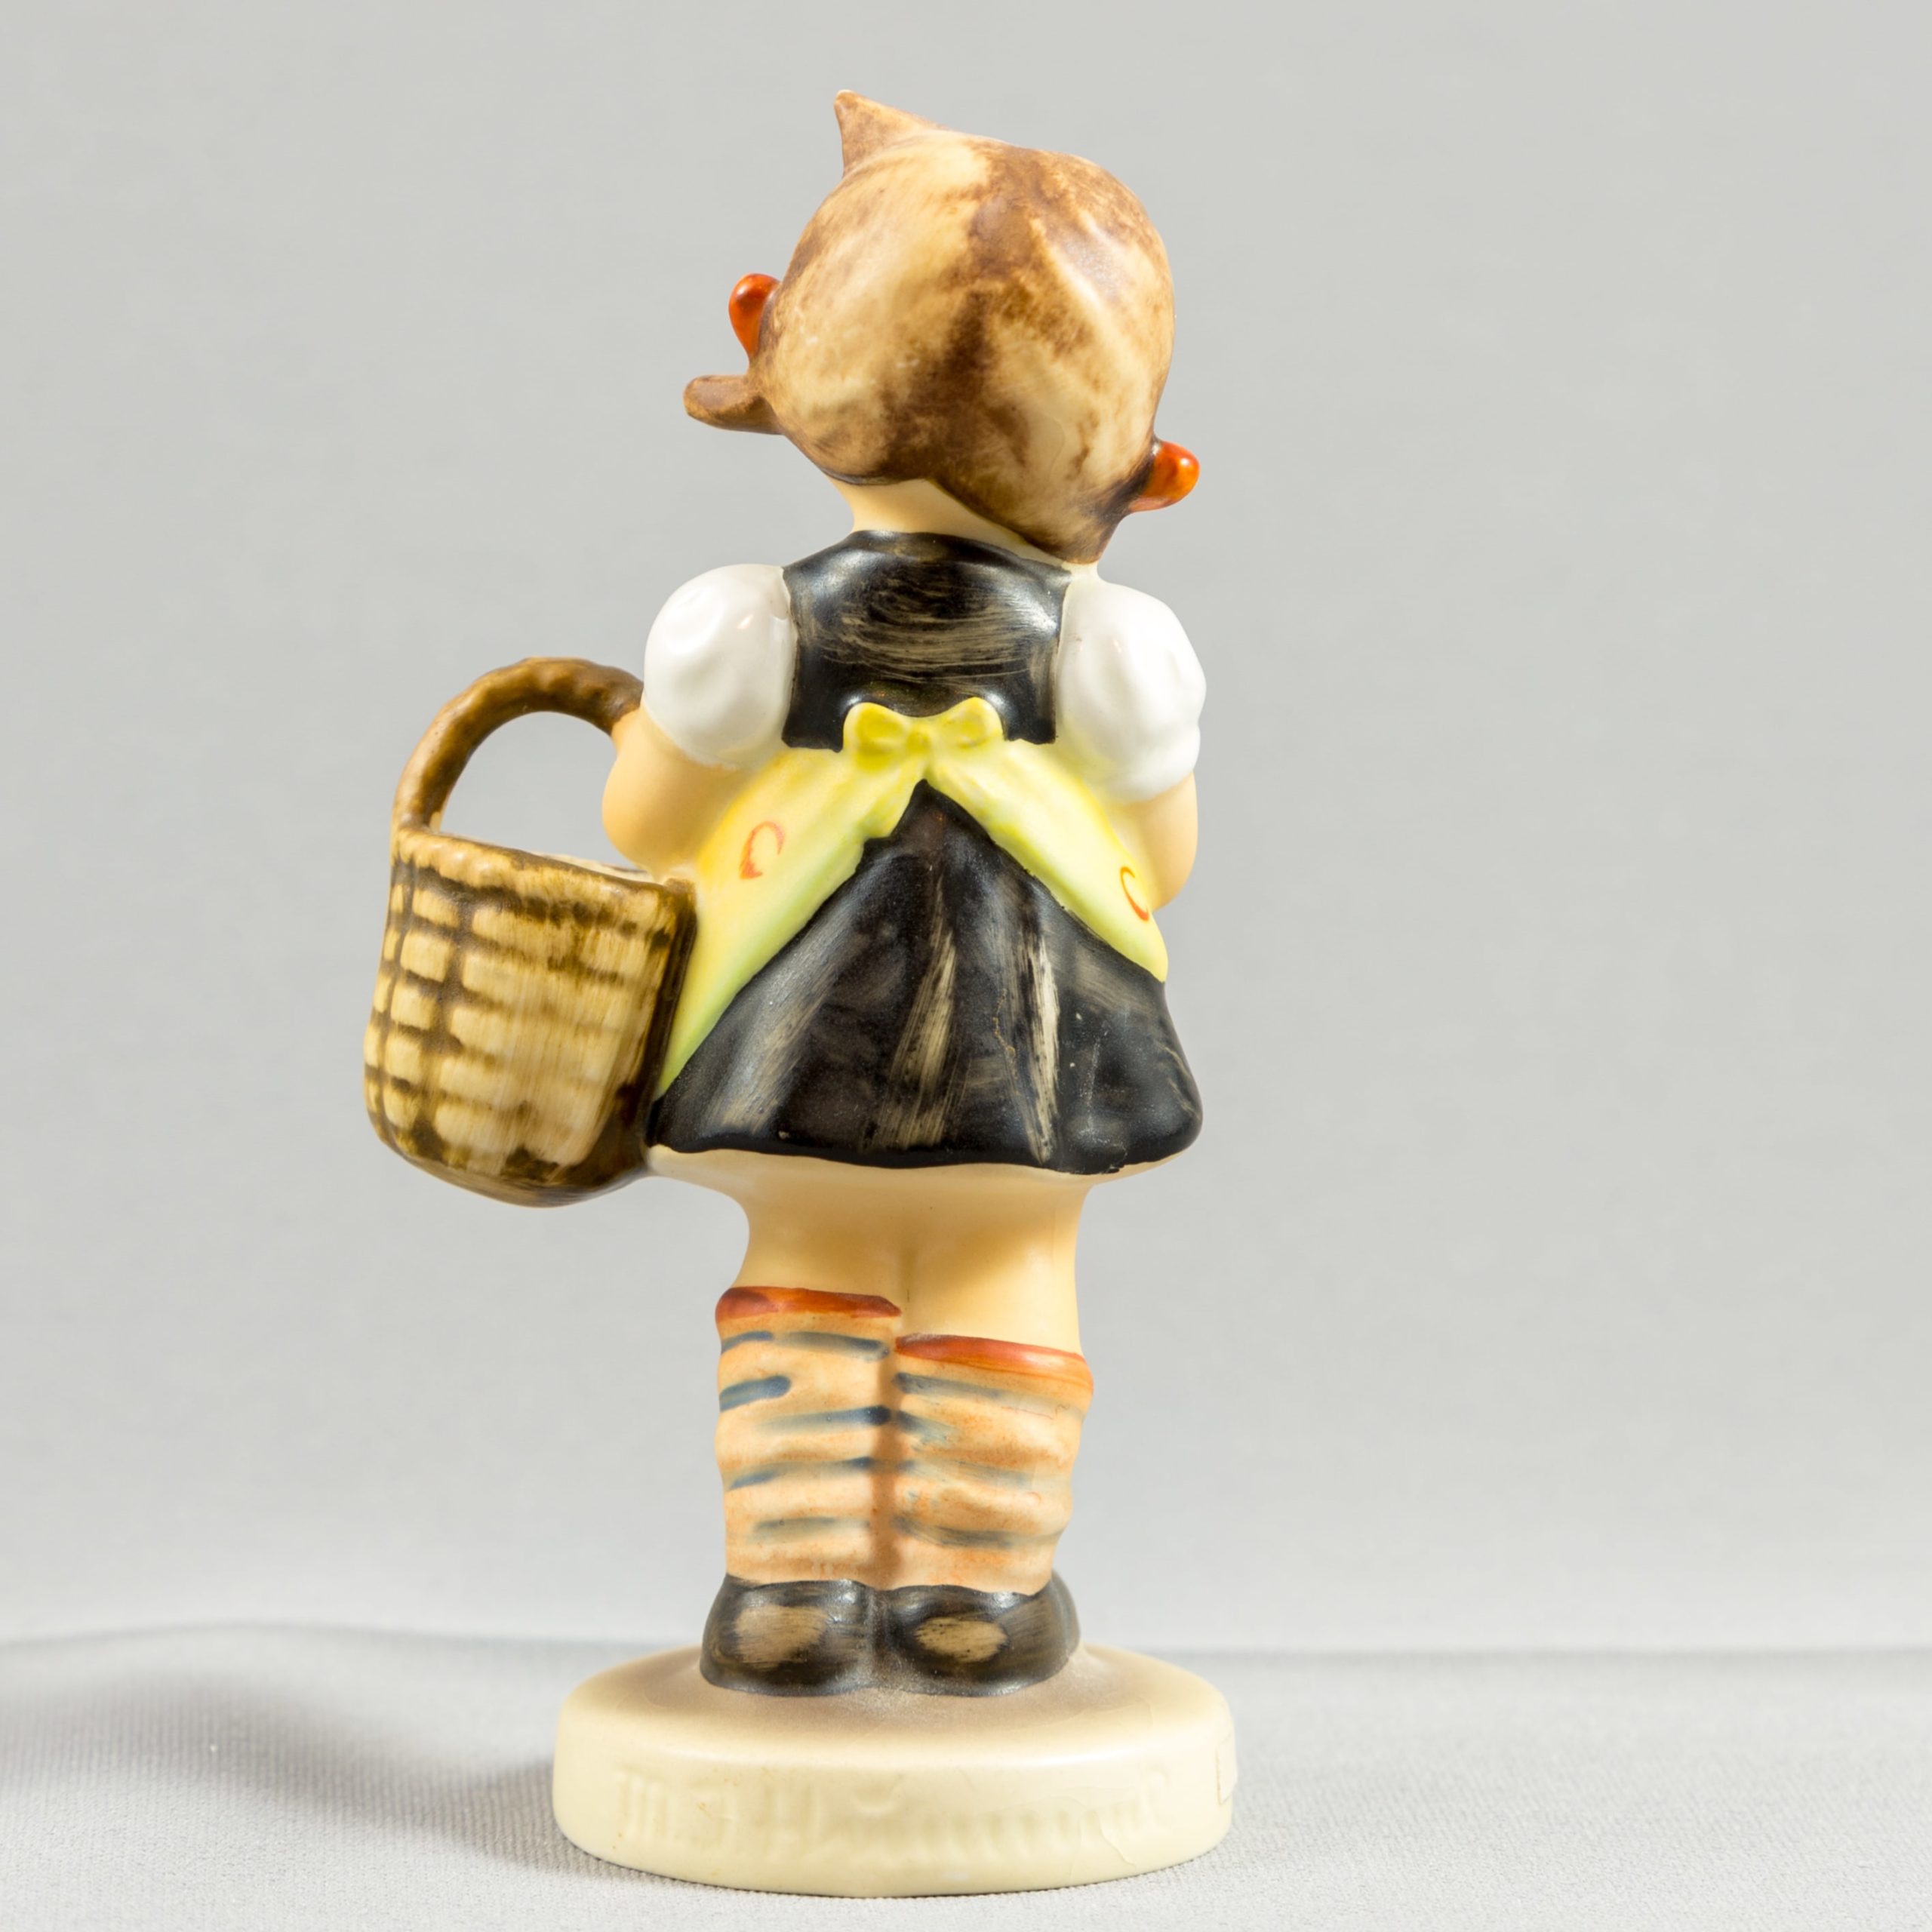 Hummel Figurine #198 “Home From Market” TMK-4 – Bored Whale At